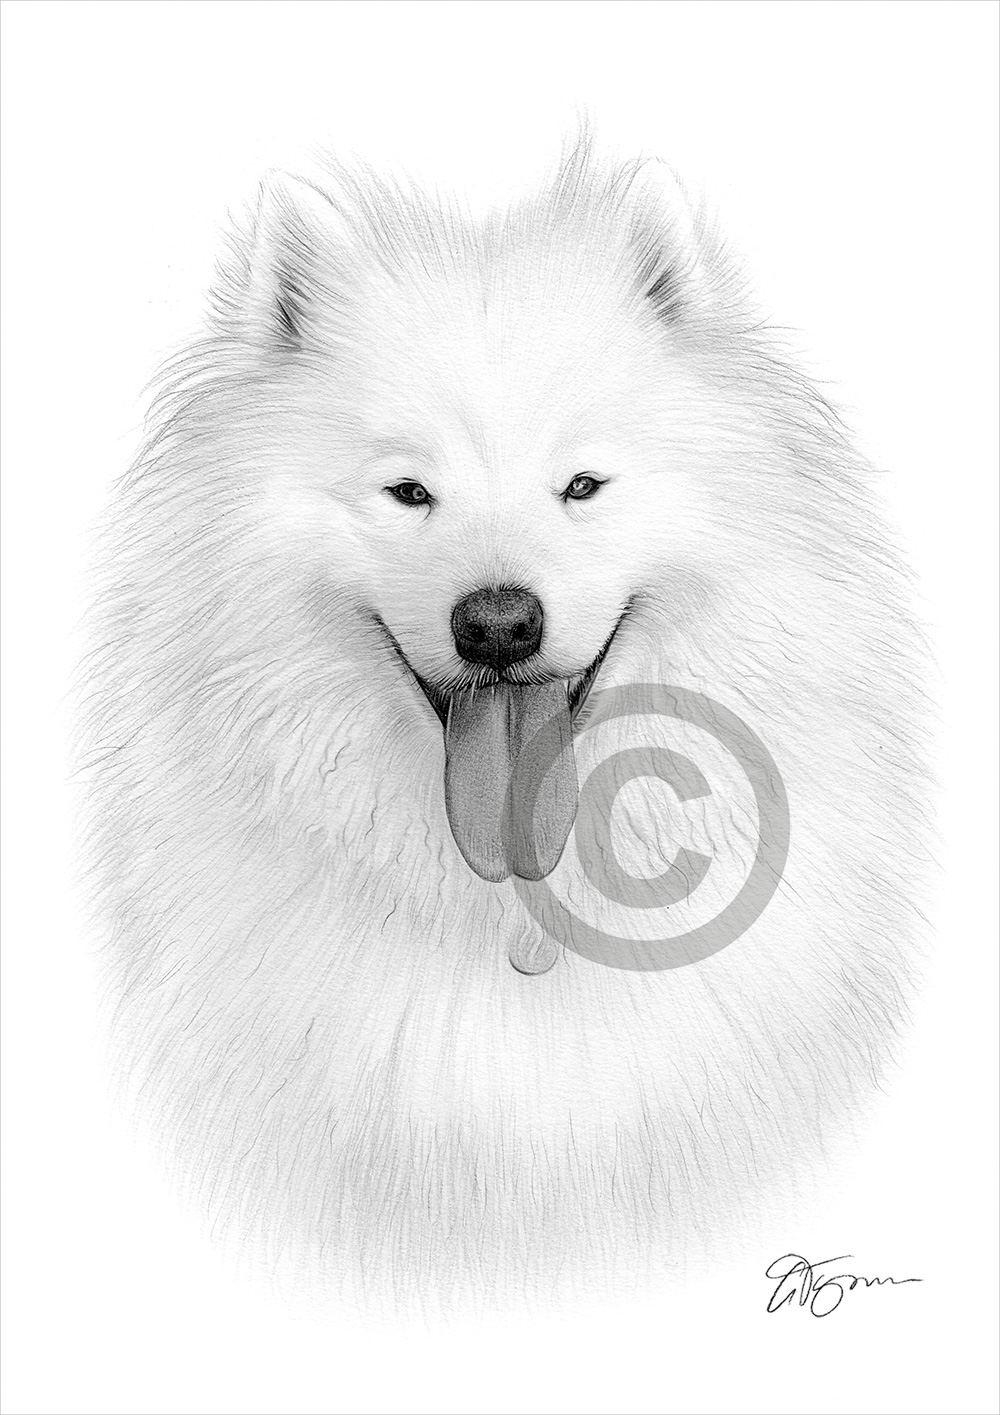 Pencil drawing commission of a white dog by artist Gary Tymon